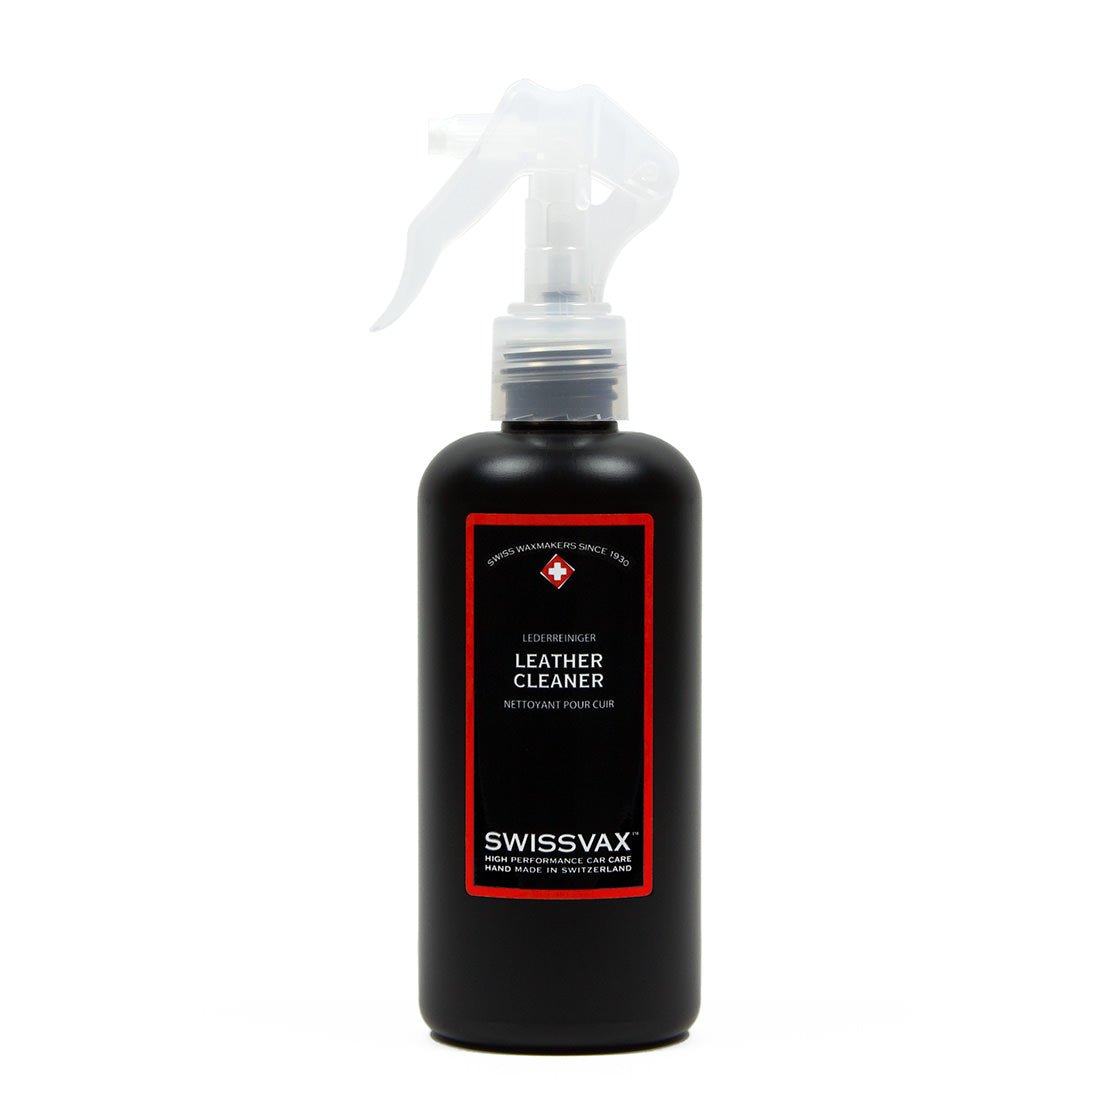 Swissvax Leather Cleaner